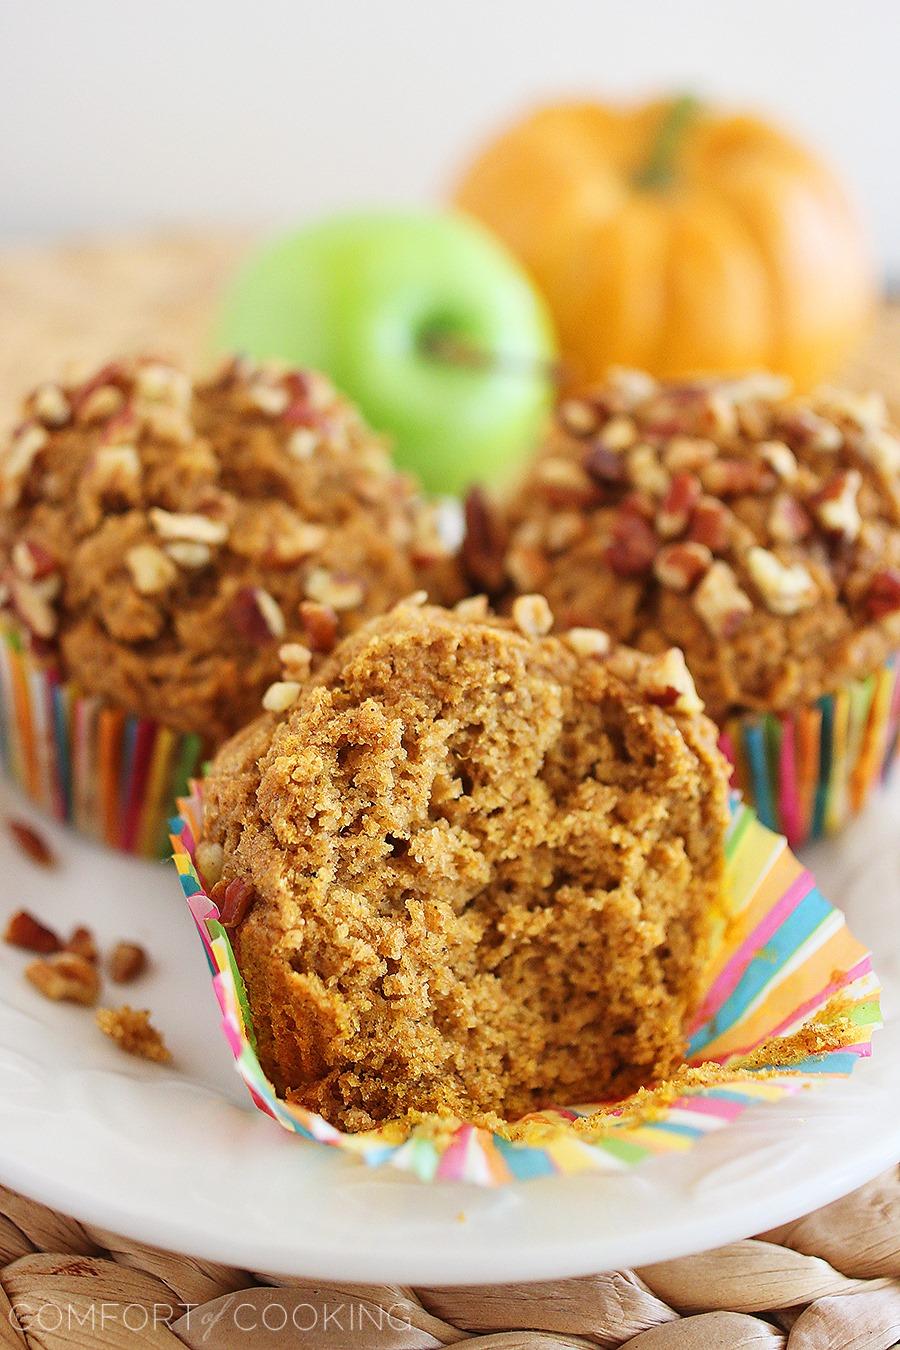 Super Soft 100% Whole Wheat Apple-Pumpkin Muffins – These spiced whole wheat apple-pumpkin muffins are easy, delicious and only need 1 bowl! | thecomfortofcooking.com